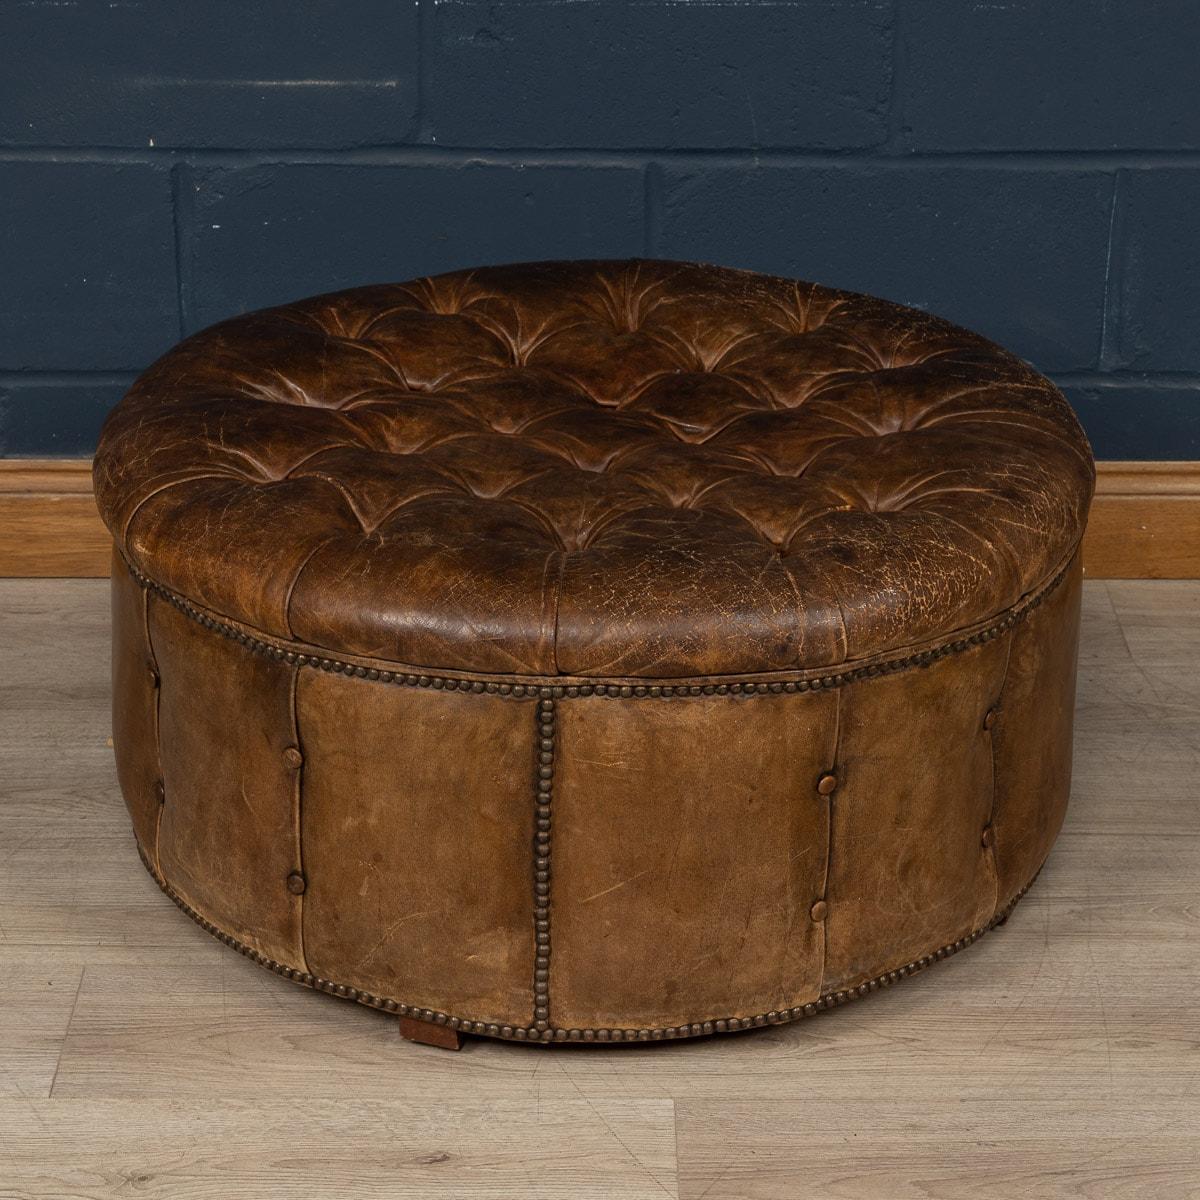 20th Century English Large Round Brown Leather Button-Back Footstool 13